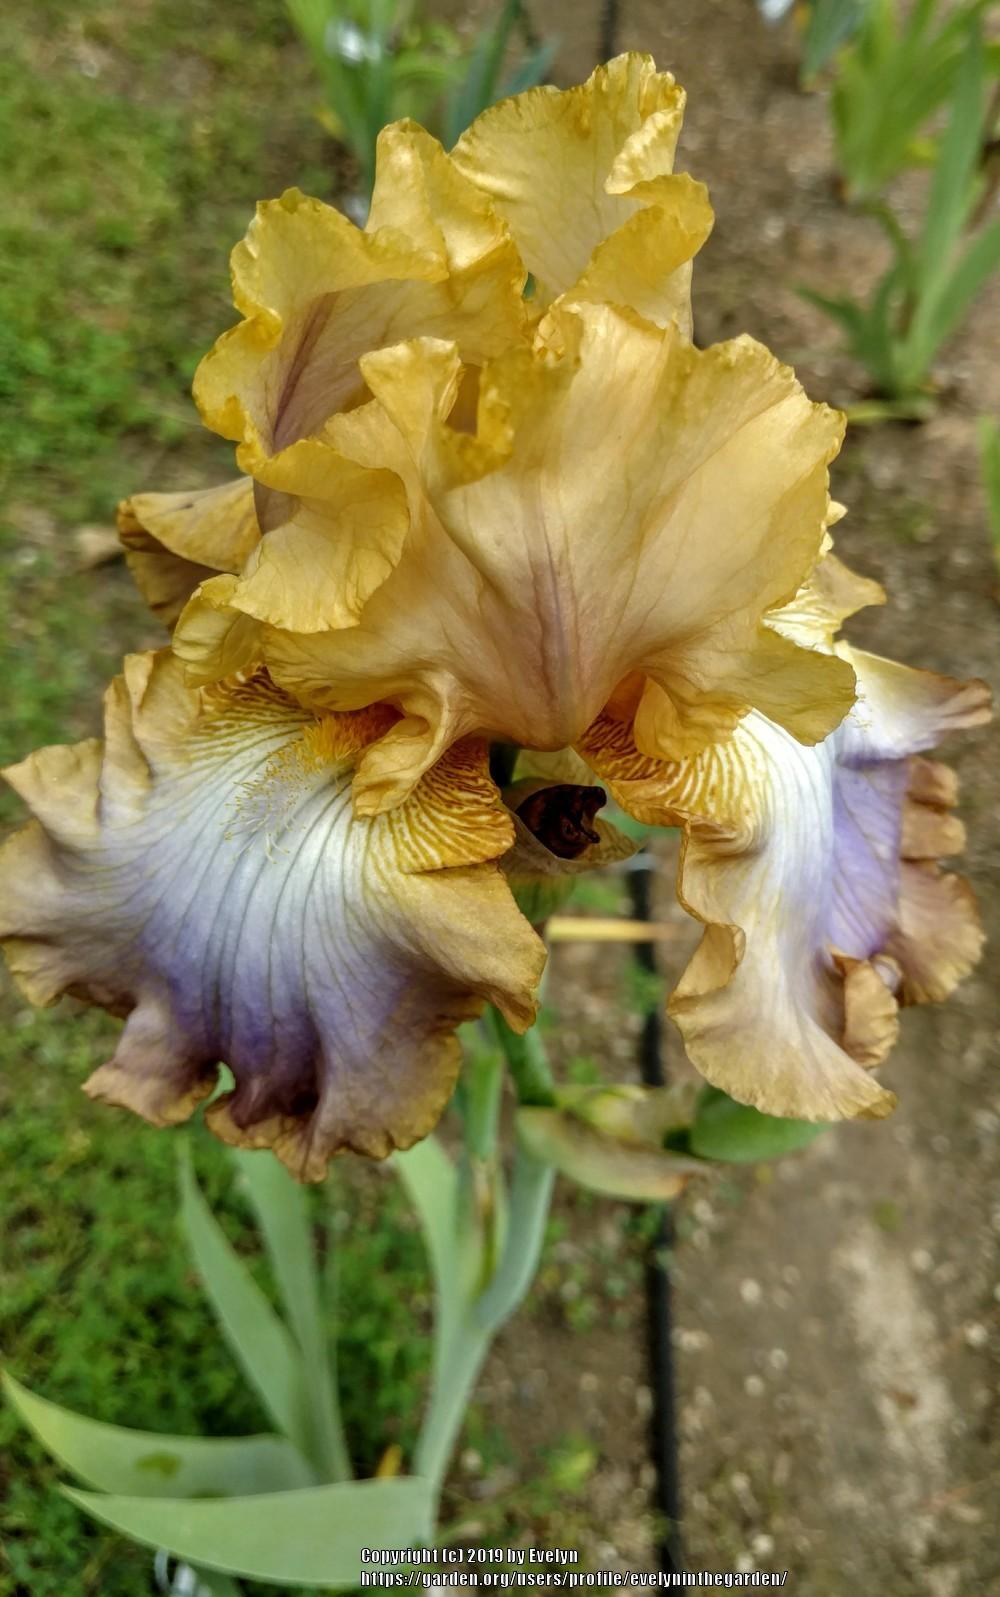 Photo of Tall Bearded Iris (Iris 'Hope Is Everything') uploaded by evelyninthegarden